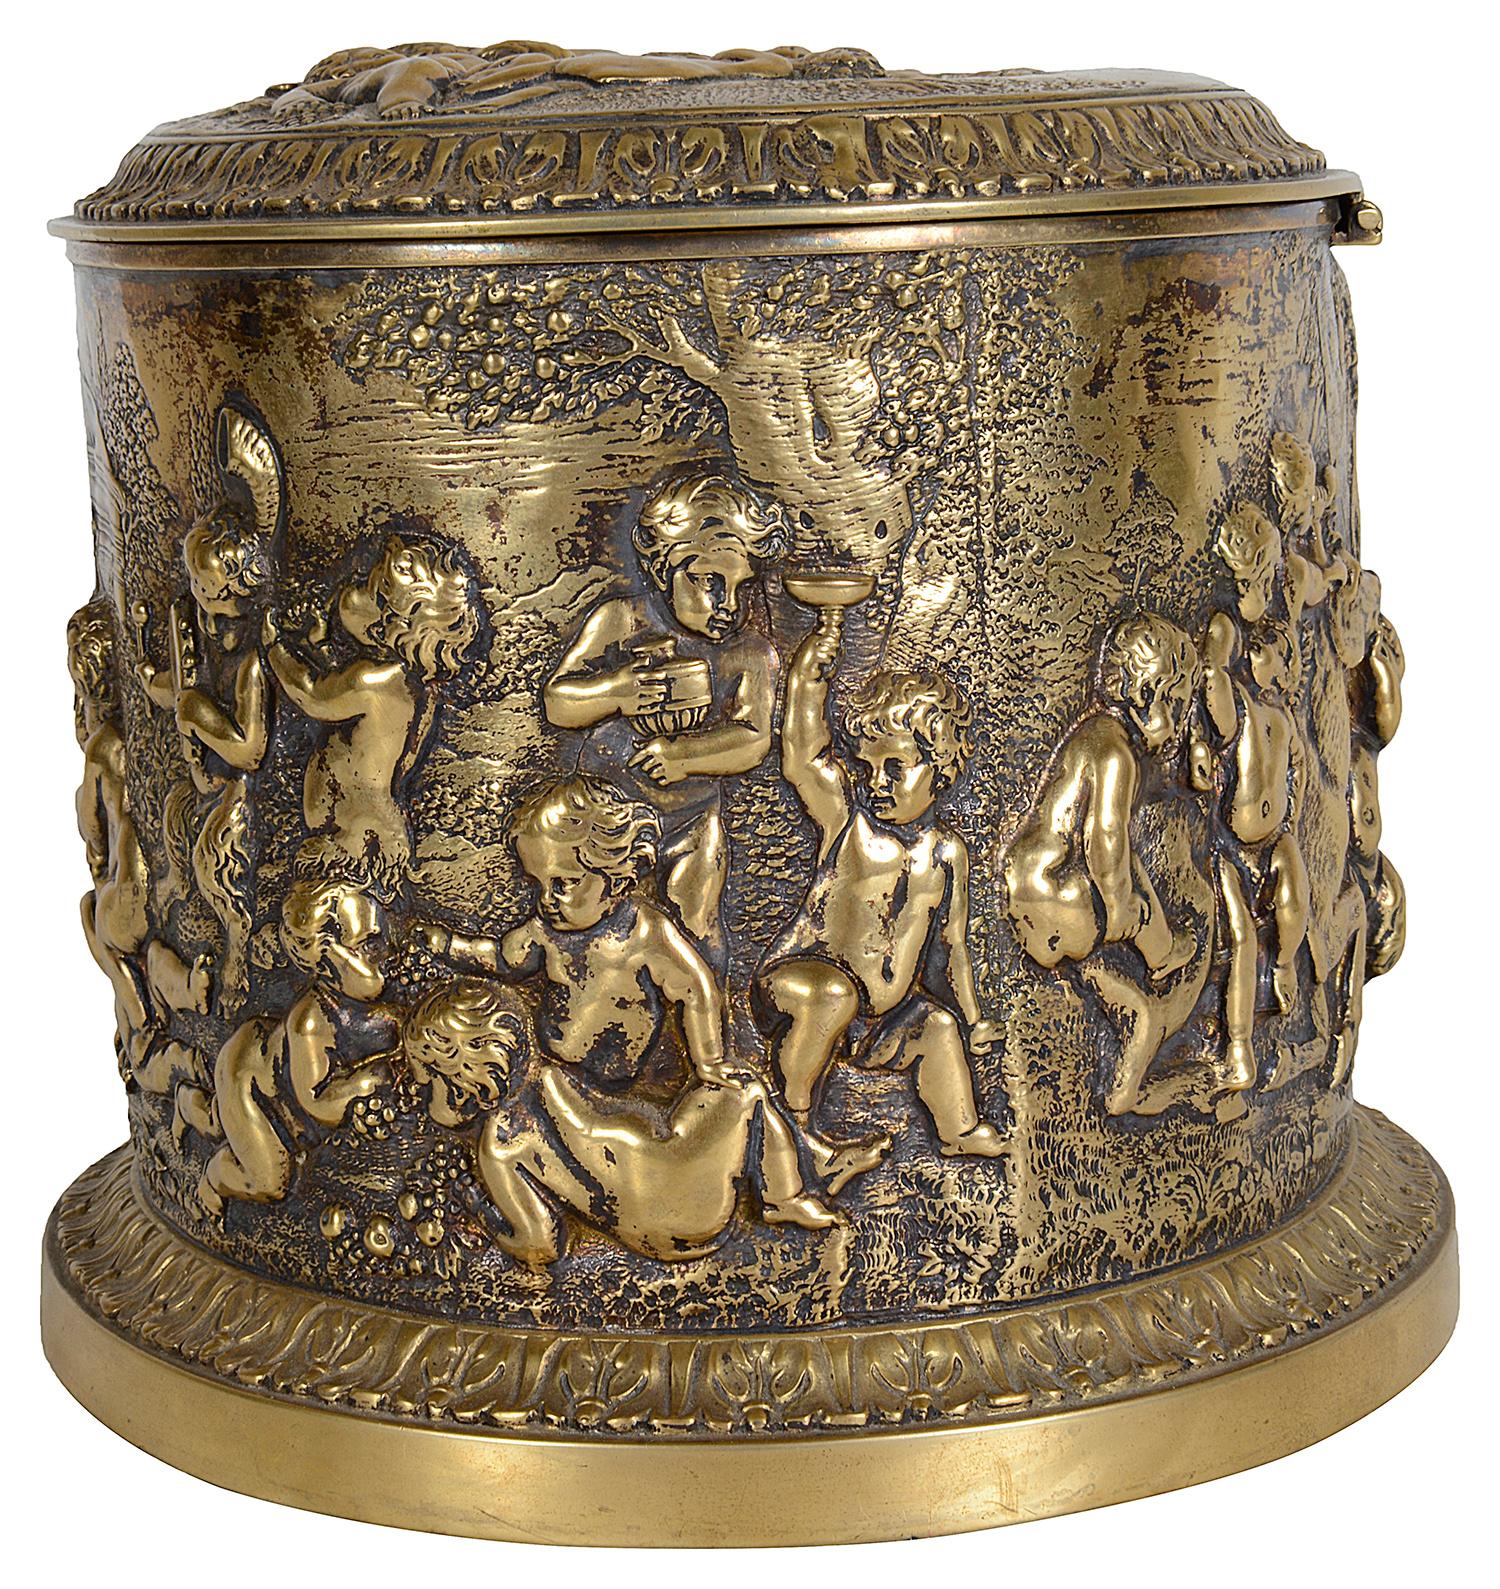 Classical 19th Century Gilded Ormolu Embossed Tea Caddy In Good Condition For Sale In Brighton, Sussex